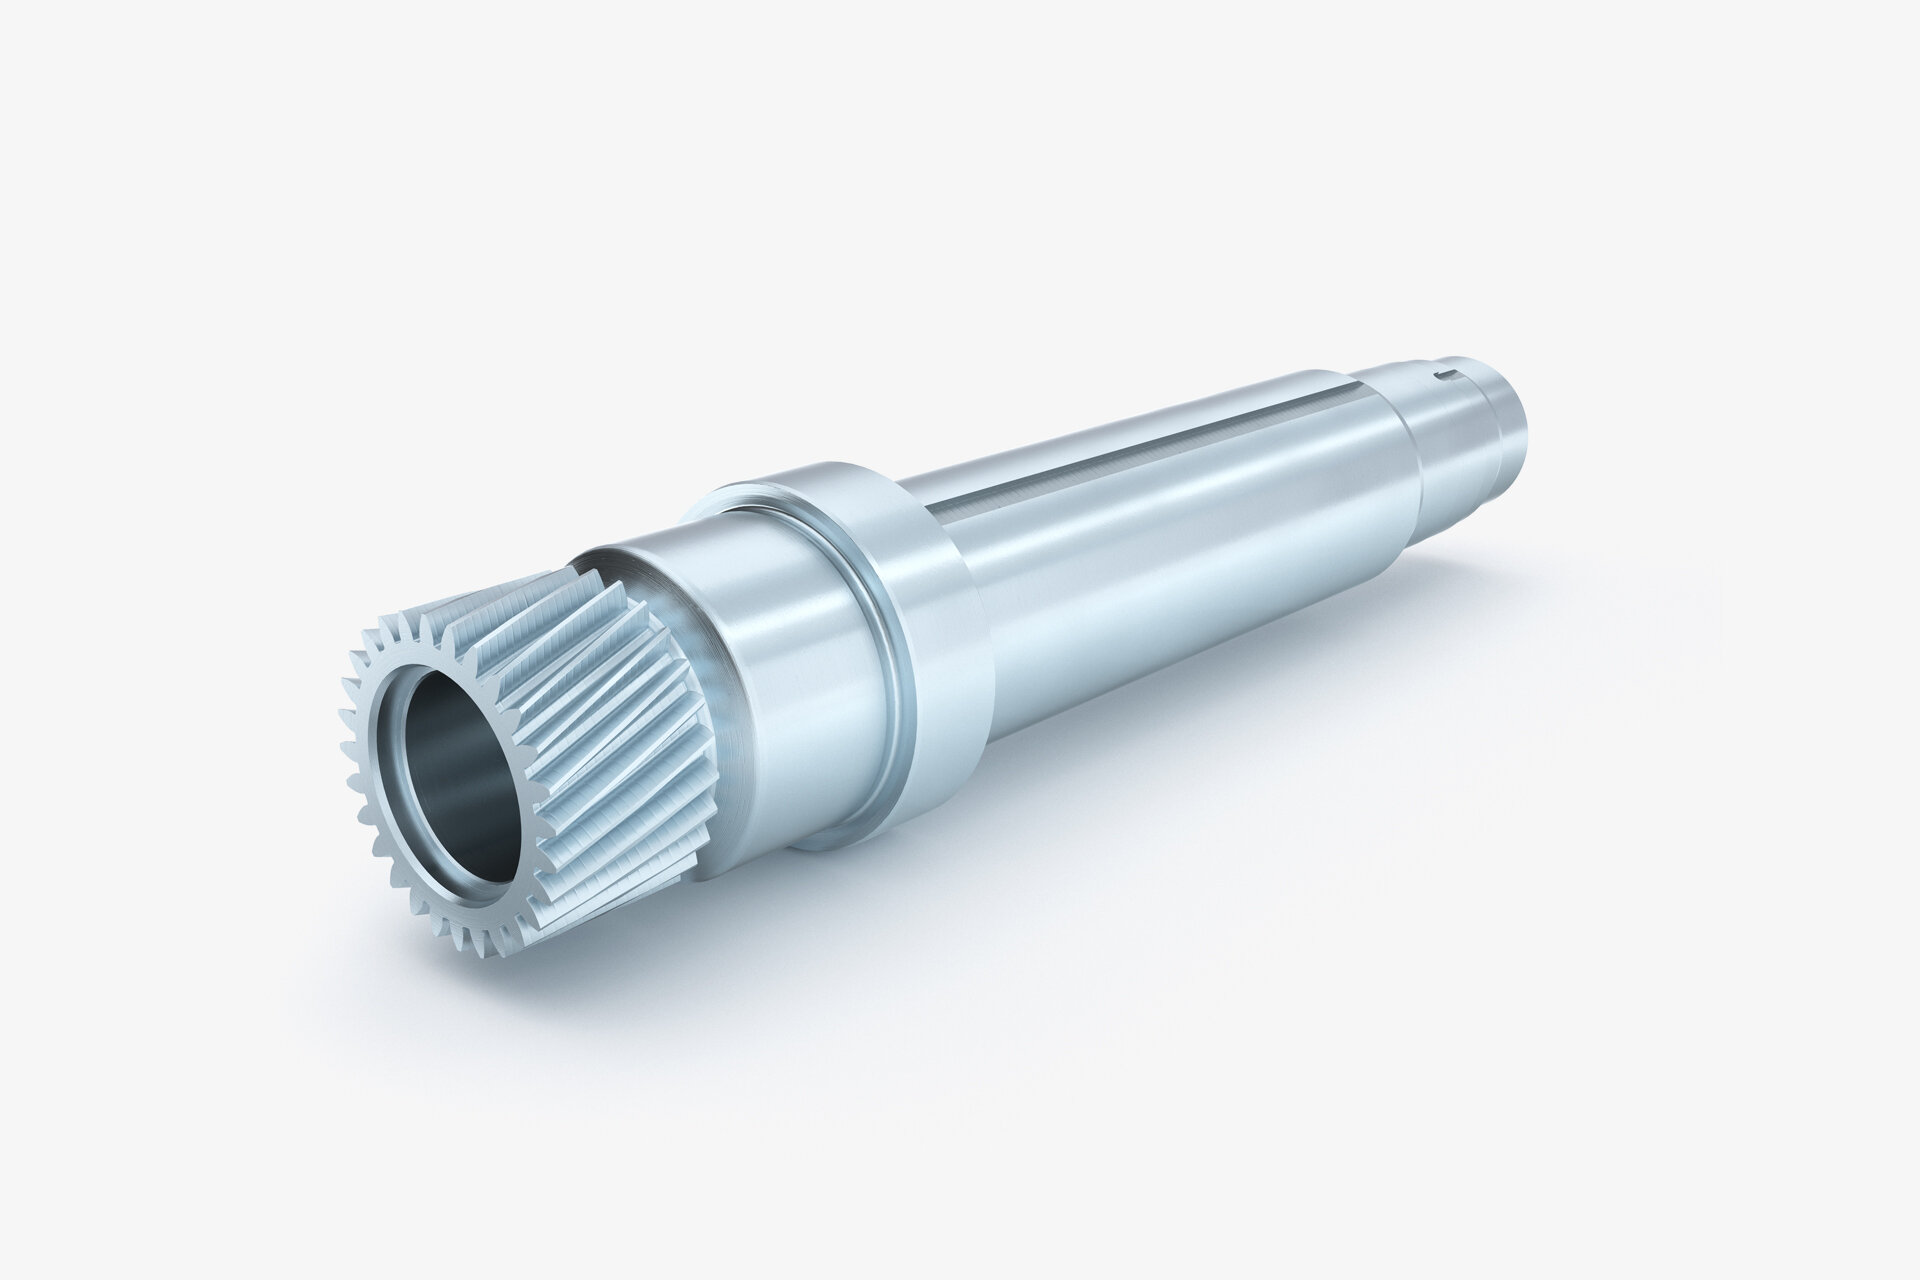 The DVS complete solution for perfect rotor shafts